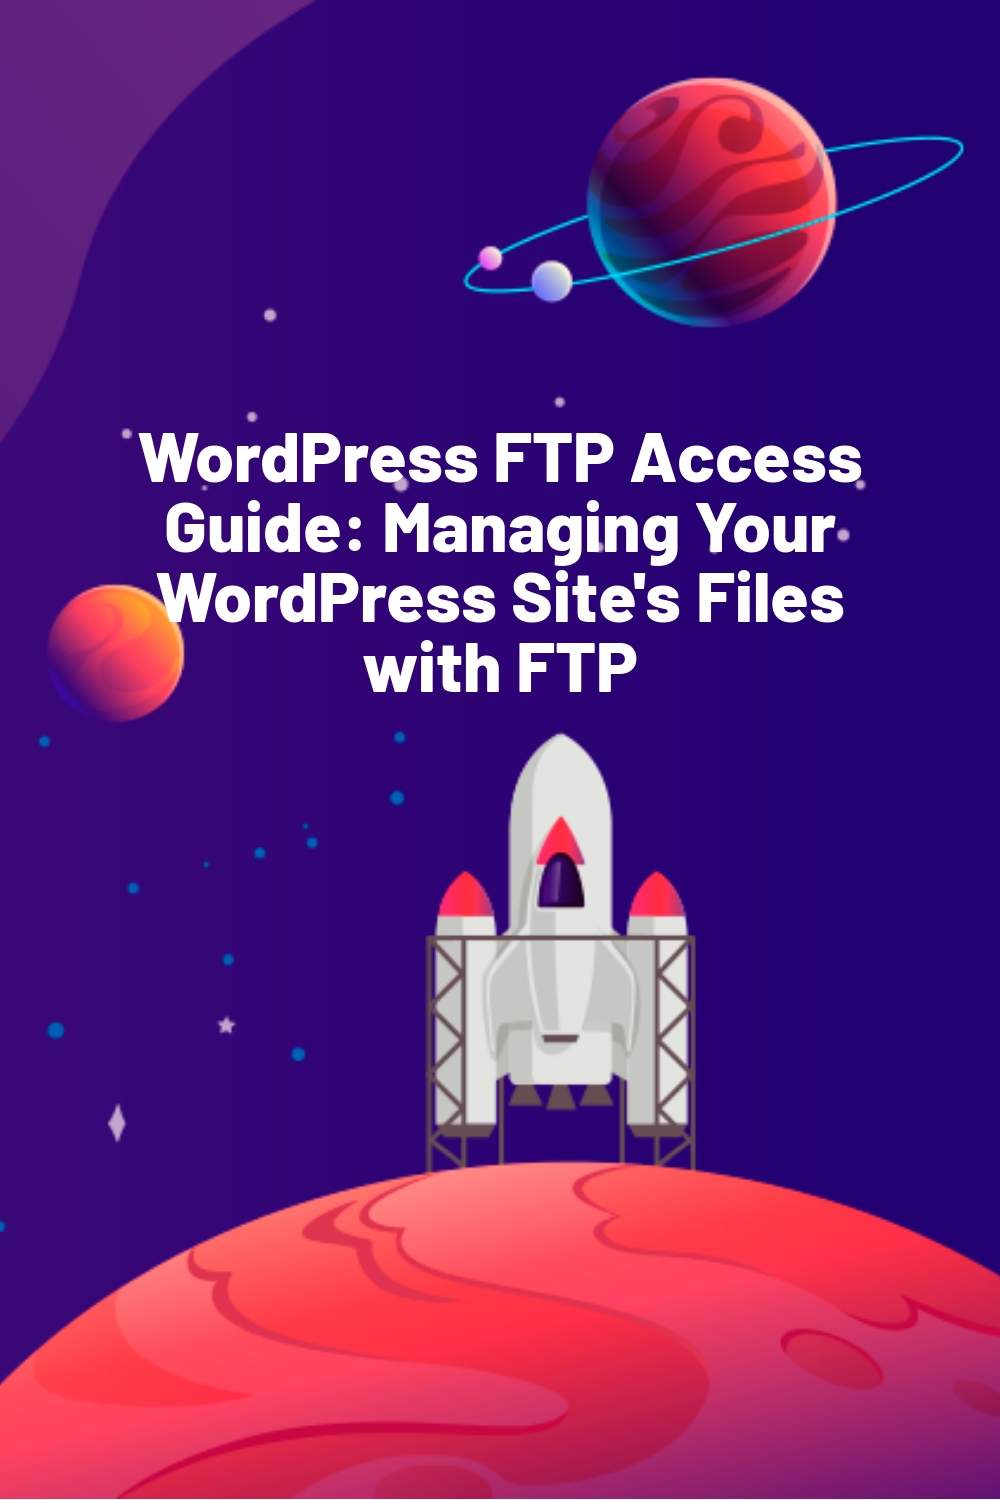 WordPress FTP Access Guide: Managing Your WordPress Site’s Files with FTP